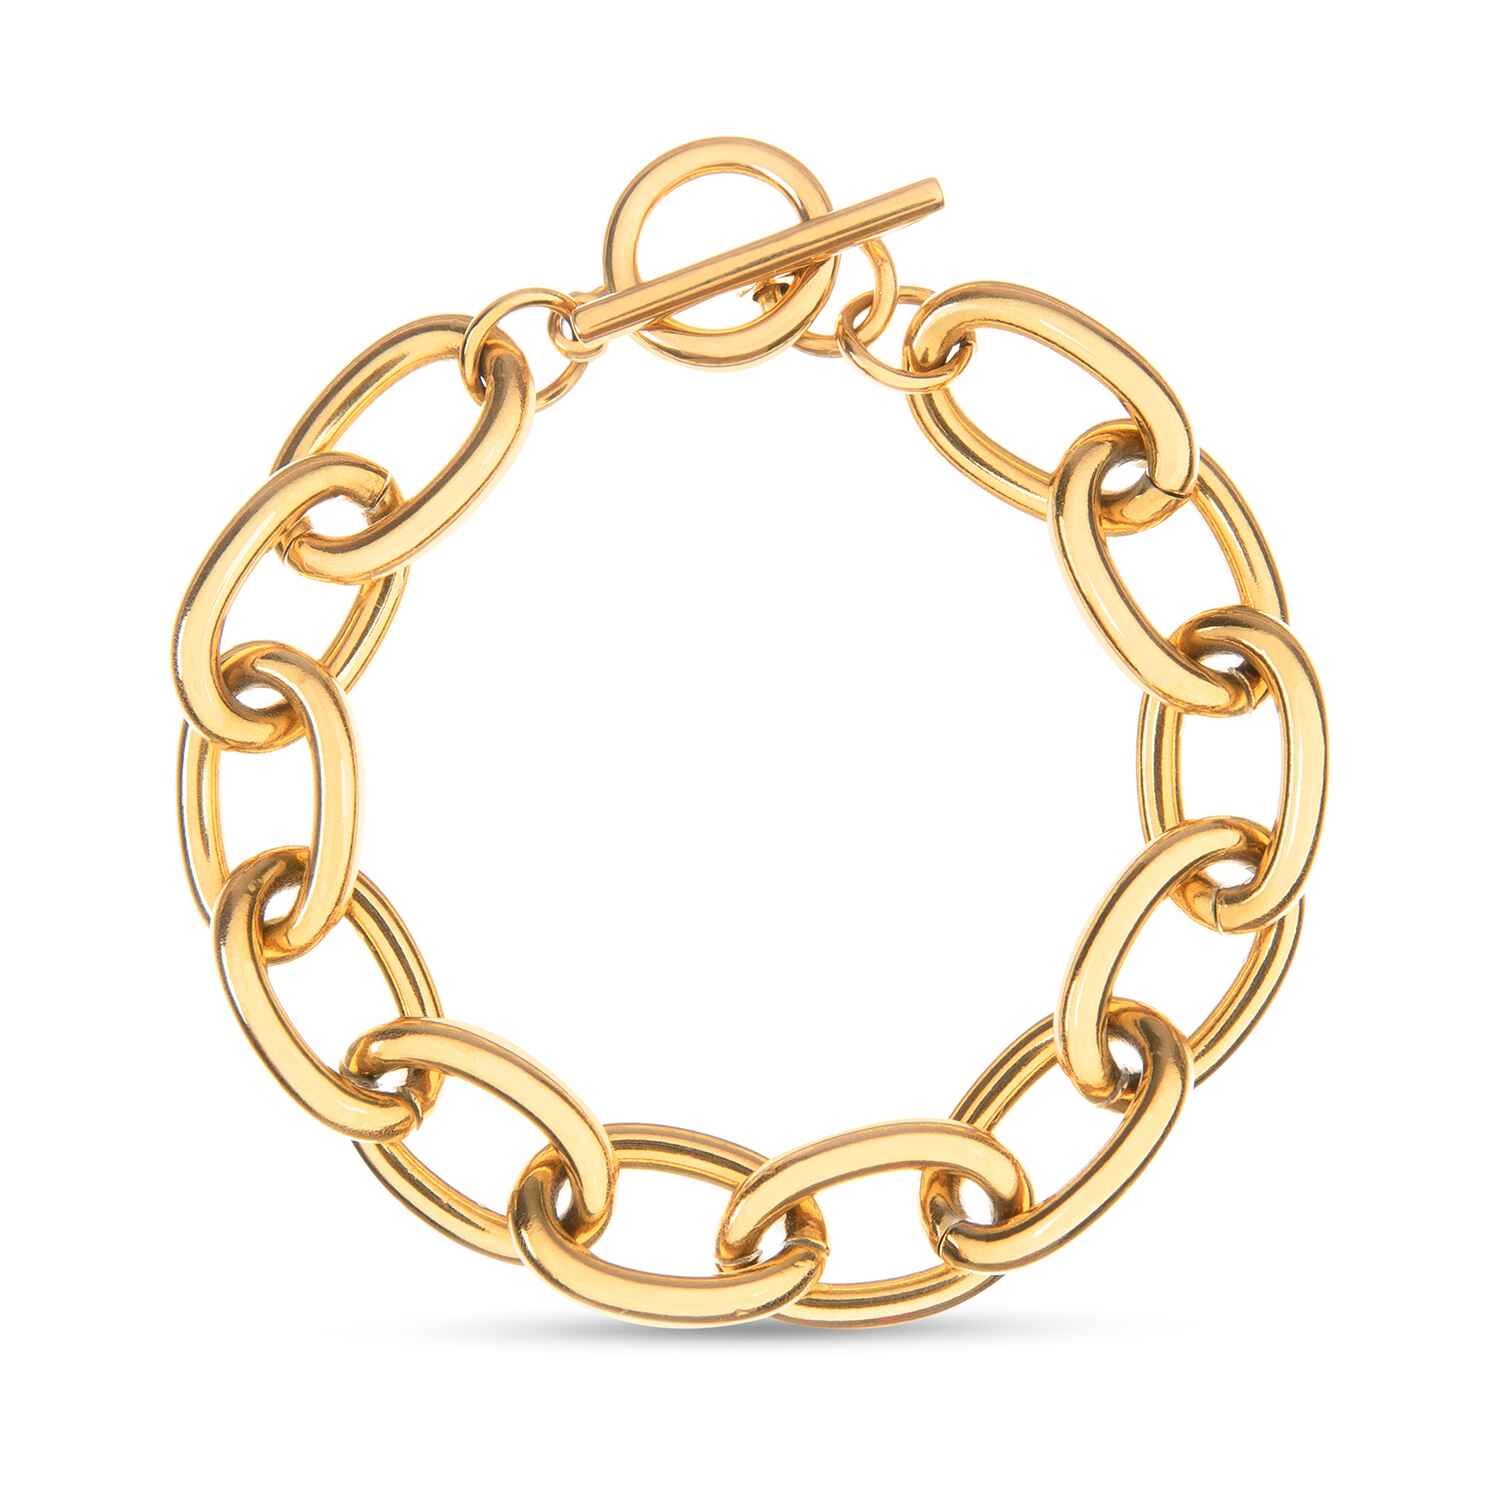 The Lola T-bar bracelet is a modern classic handcrafted sustainably to be worn solo or stacked.